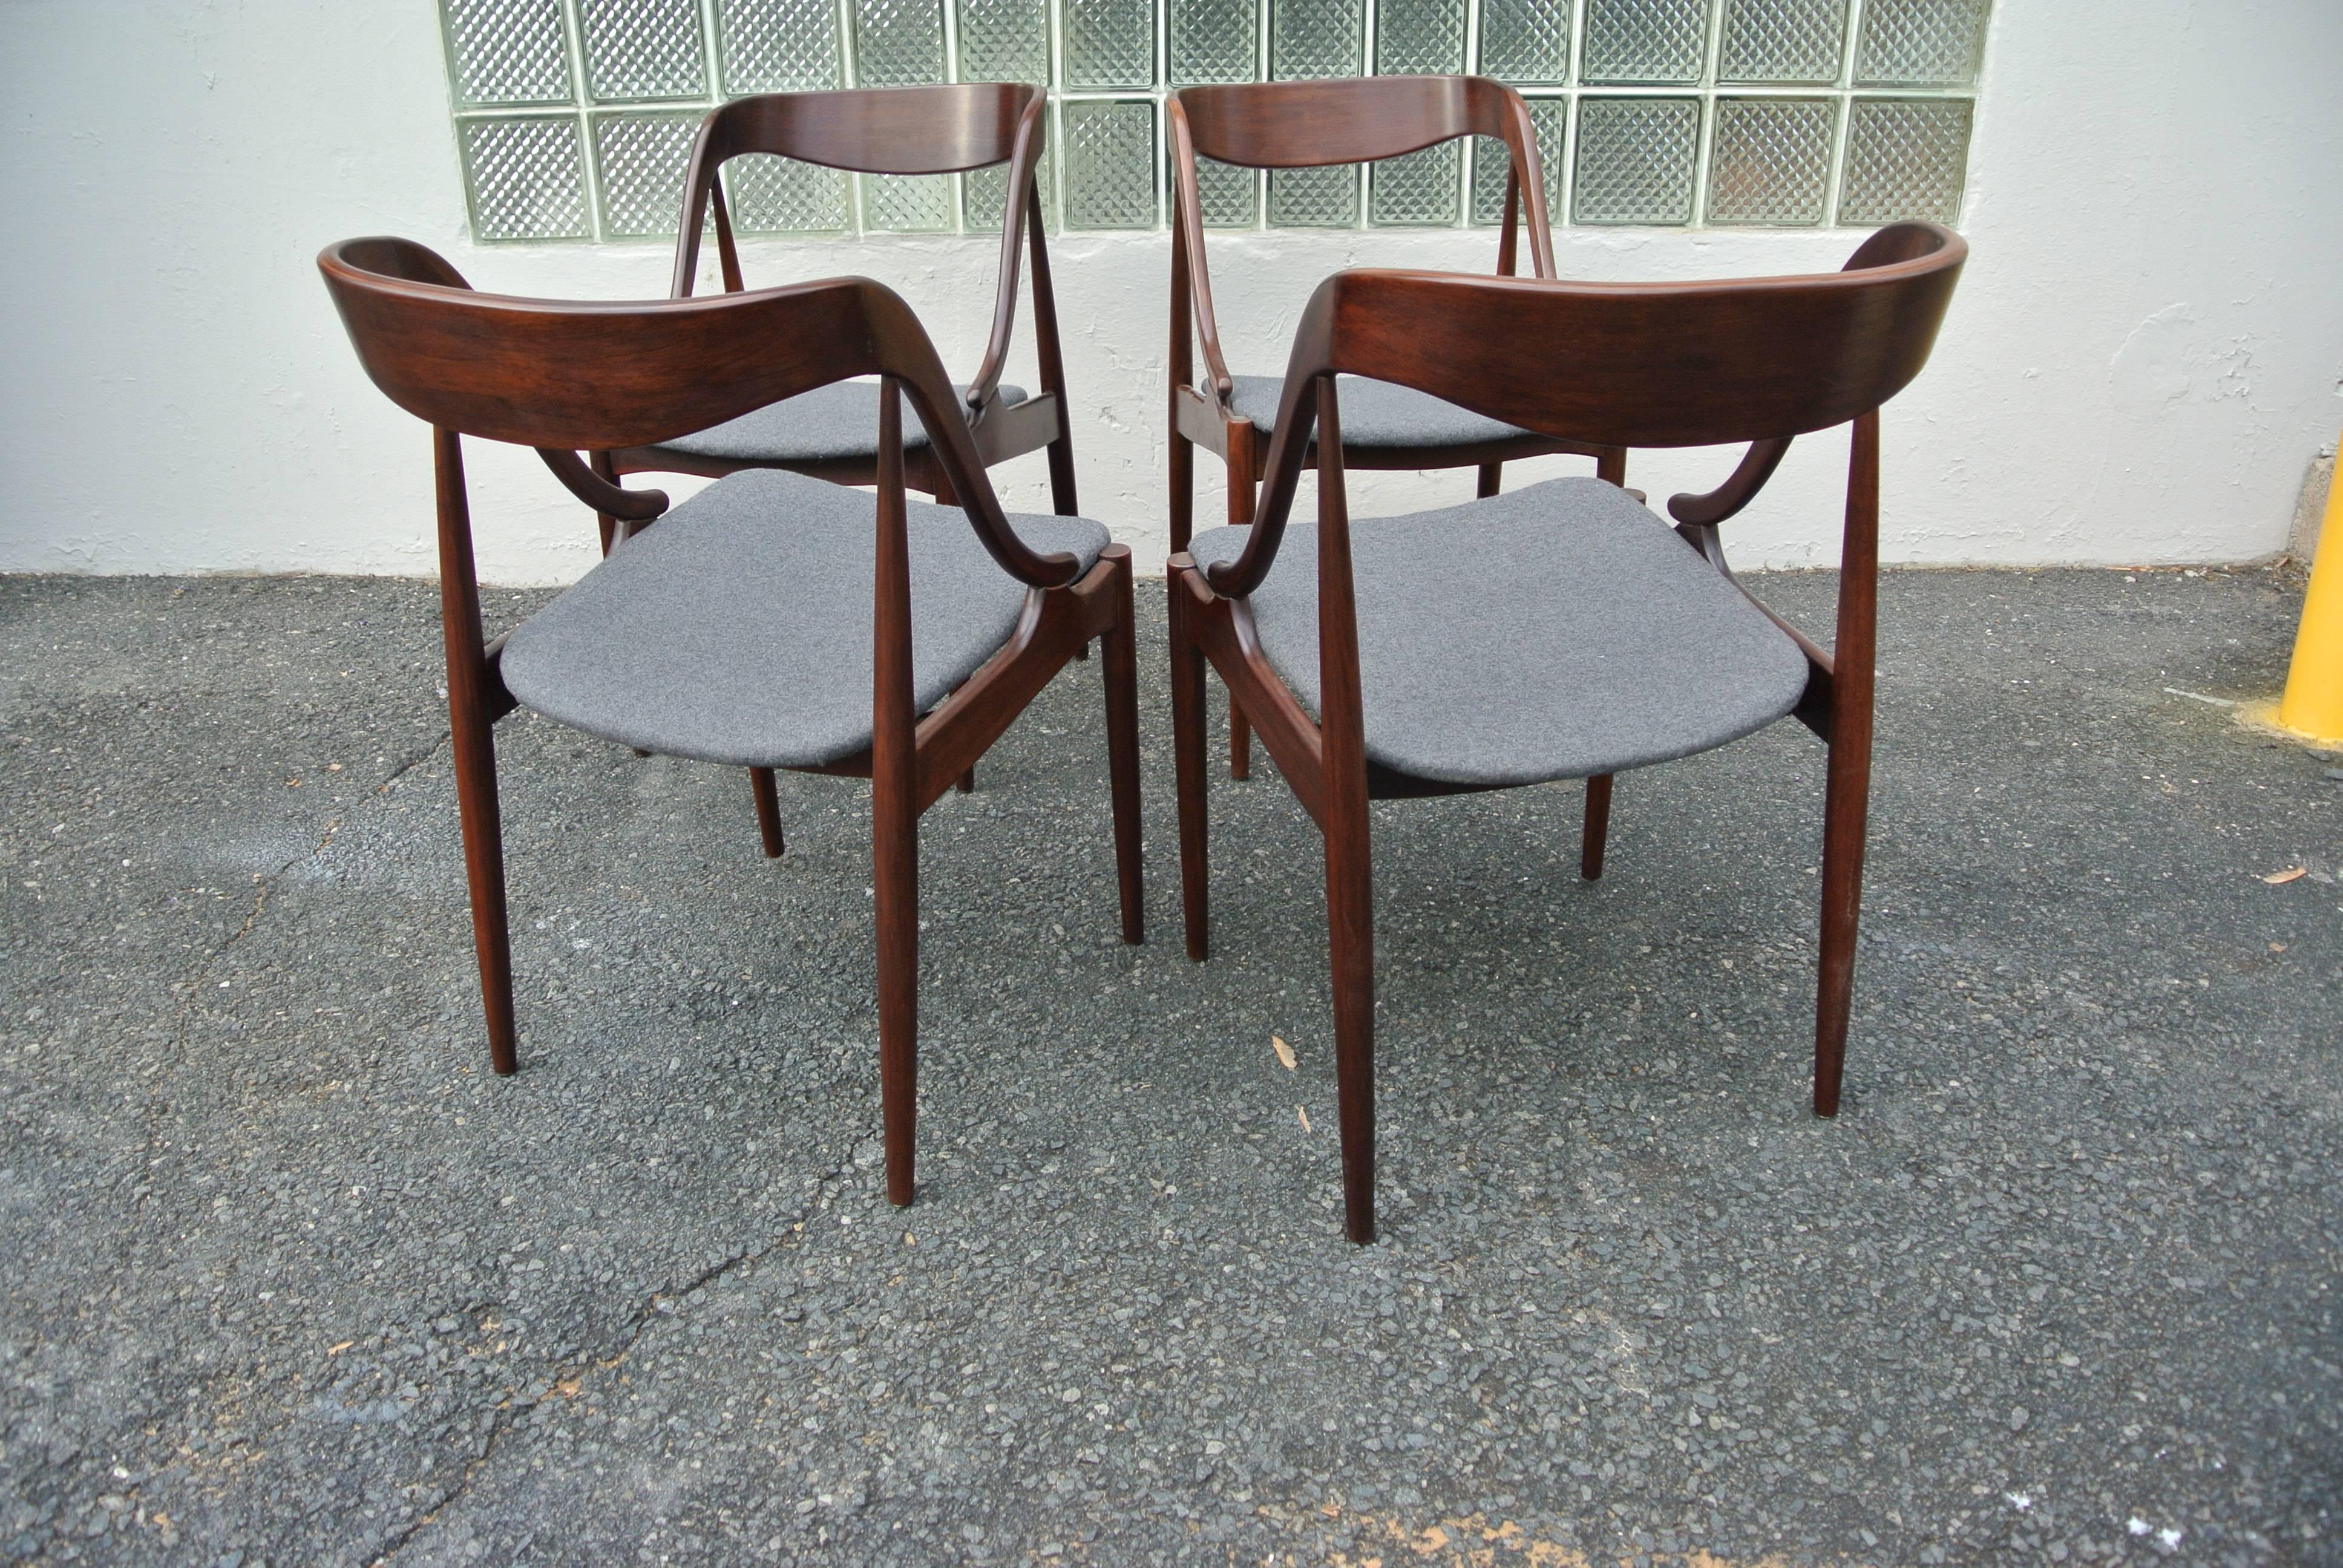 Gorgeous rosewood dining chairs by Johannes Andersen. Sculpted bentwood side chairs, newly refinished and newly upholstered Italian wool herringbone fabric.